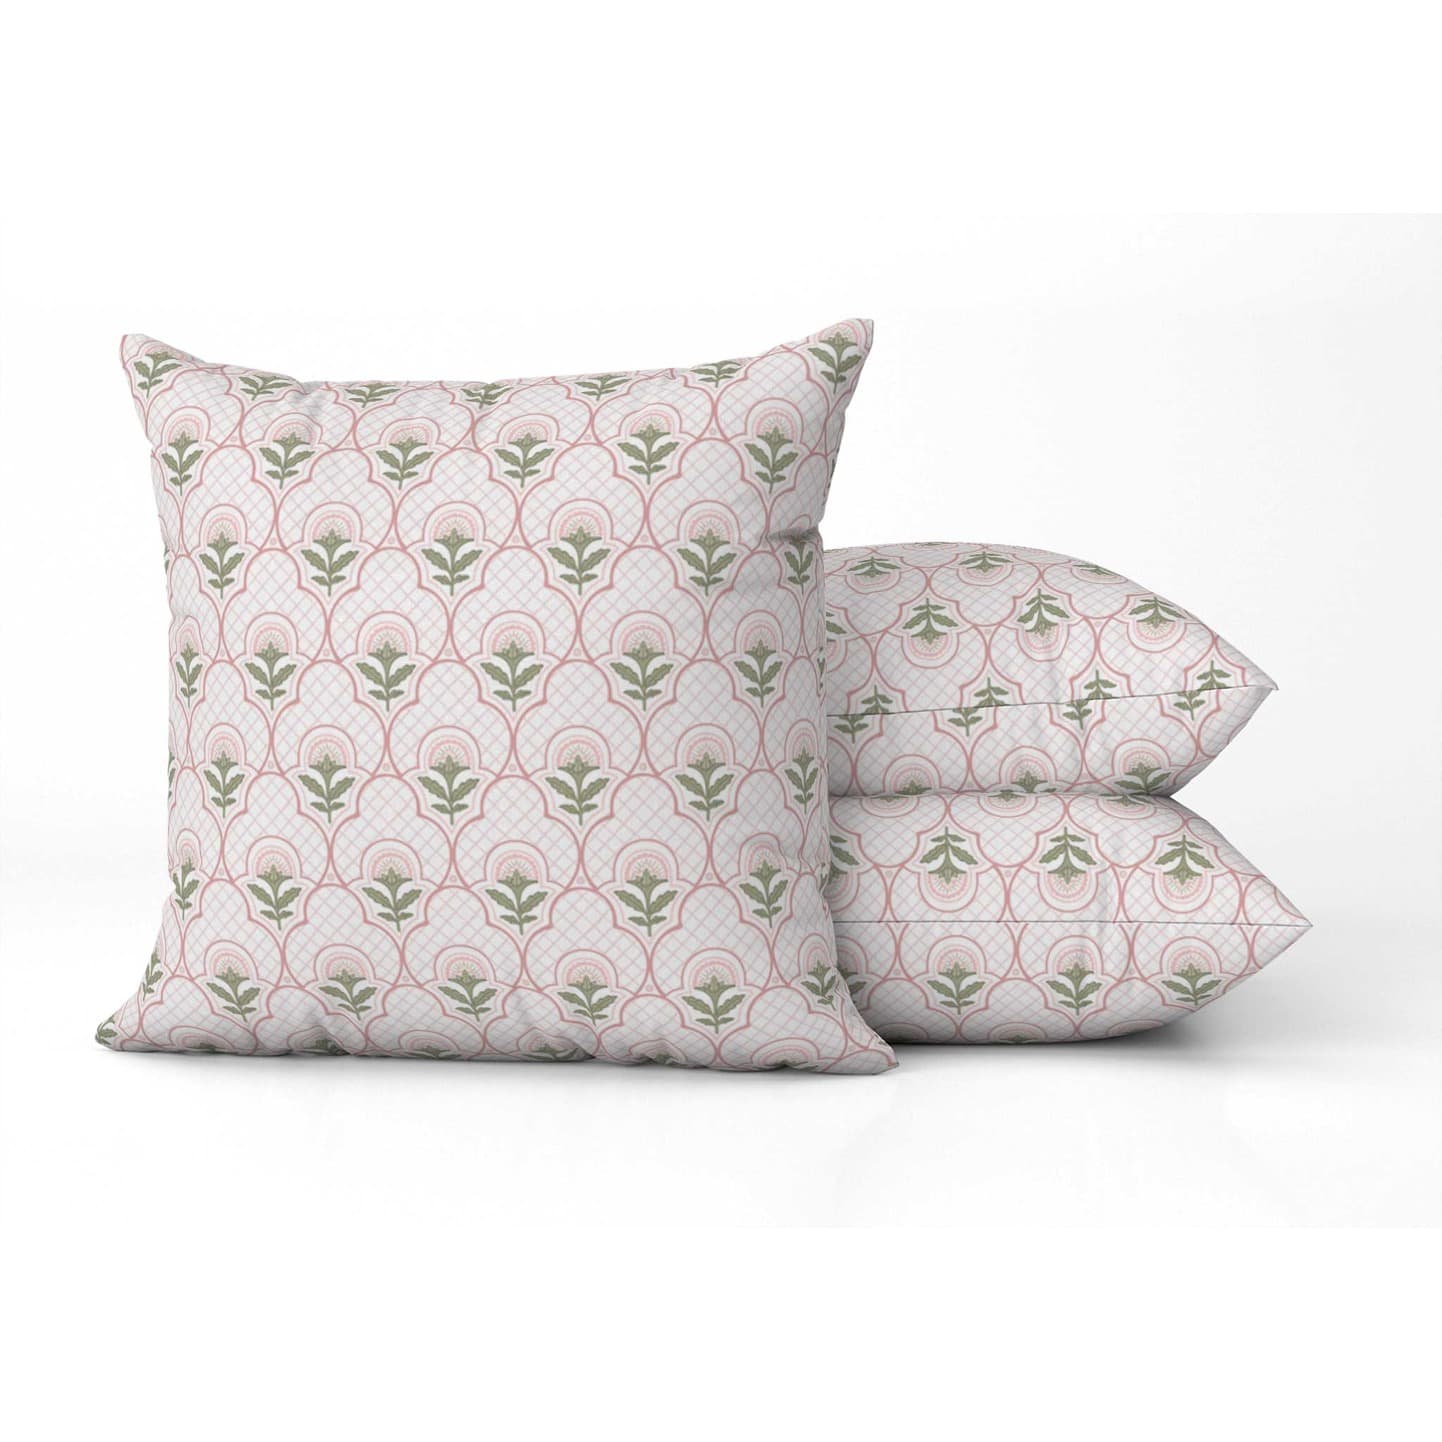 Amelia Square Pillow in Blush Olive